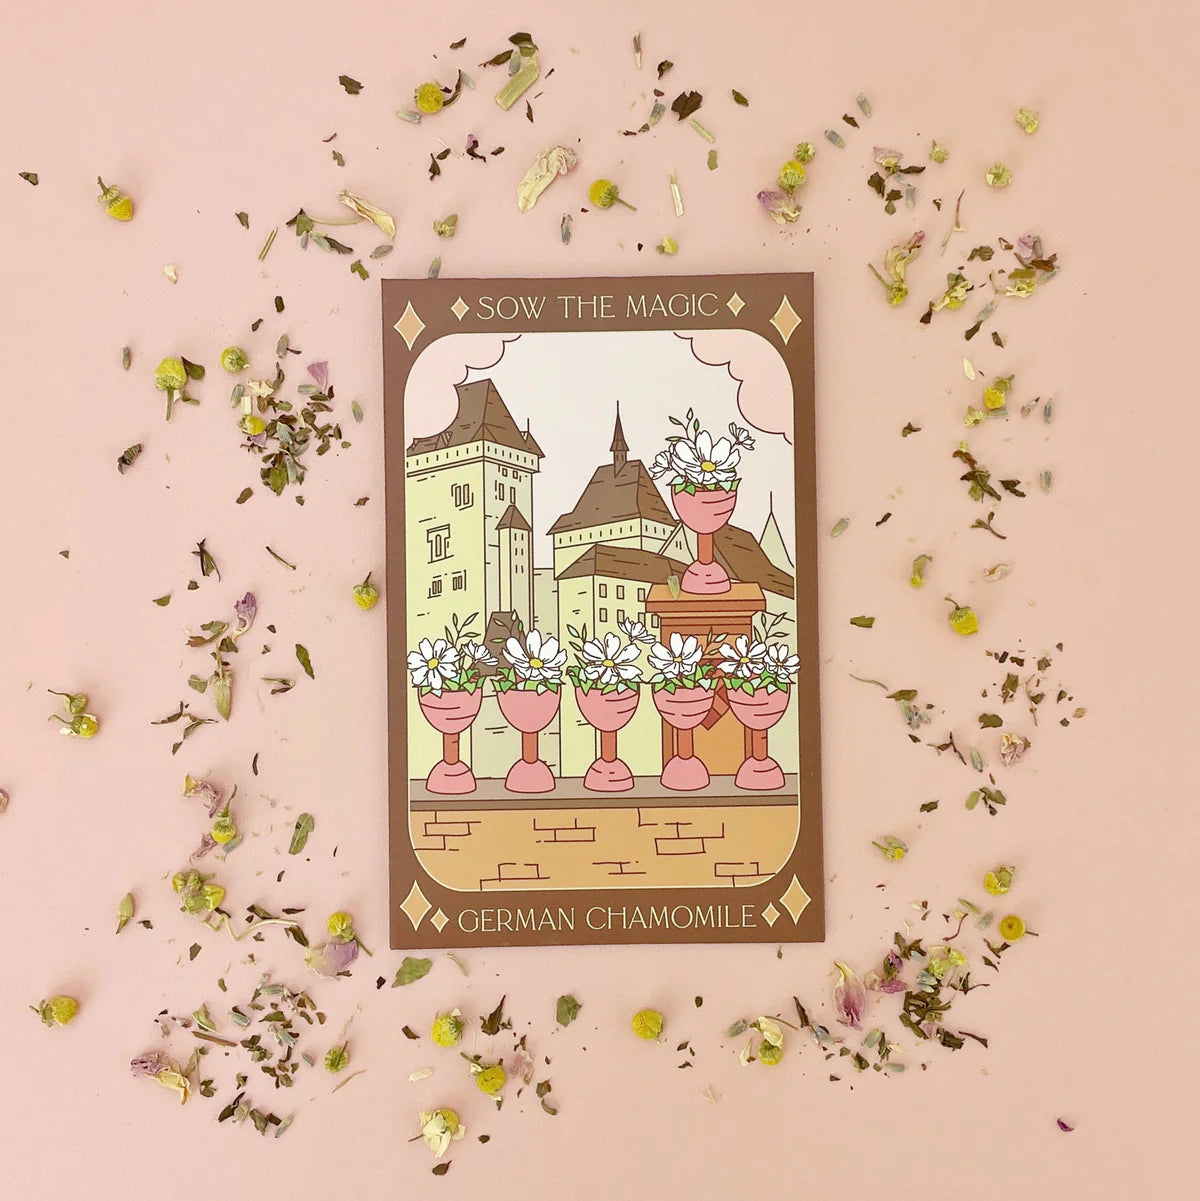 Sow the Magic German Chamomile Tarot Seed Packet